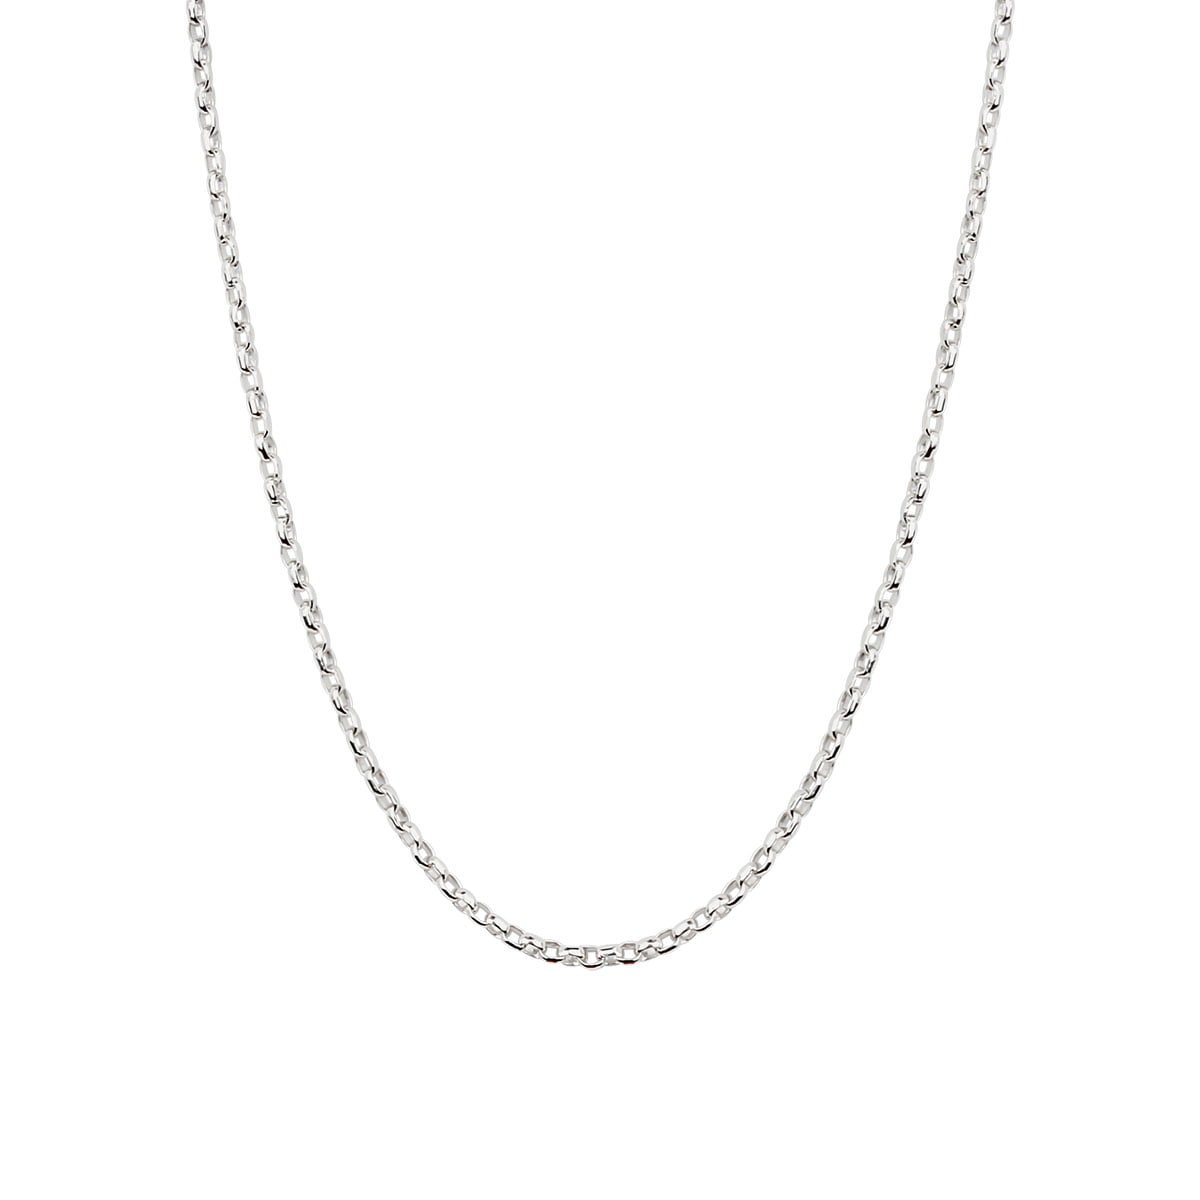 18ct White Gold Oval Link Chain Necklace